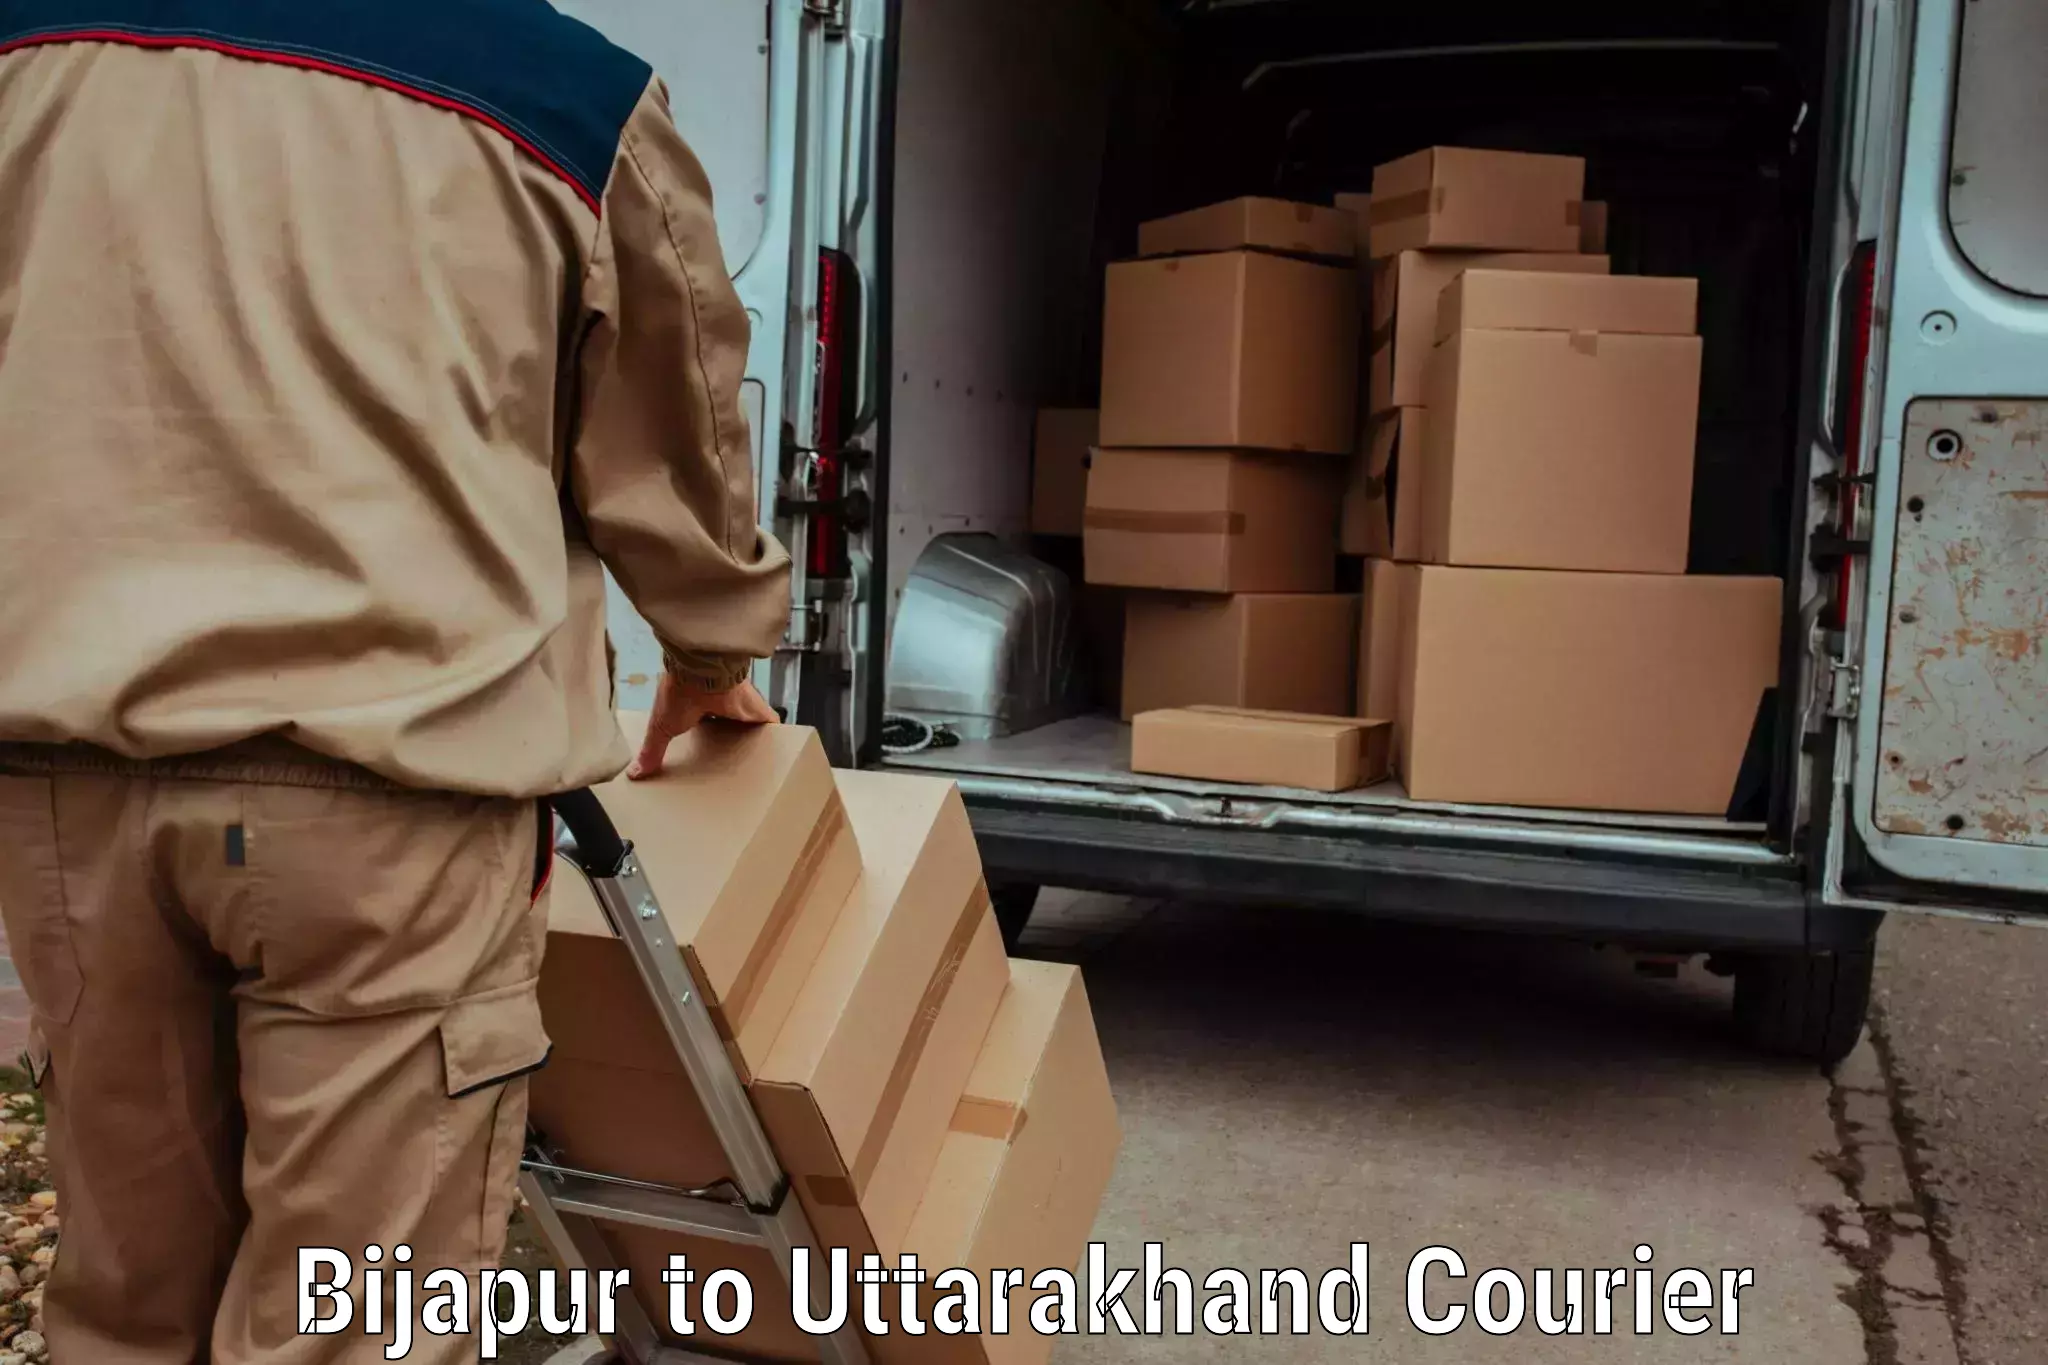 Subscription-based courier Bijapur to Rudrapur